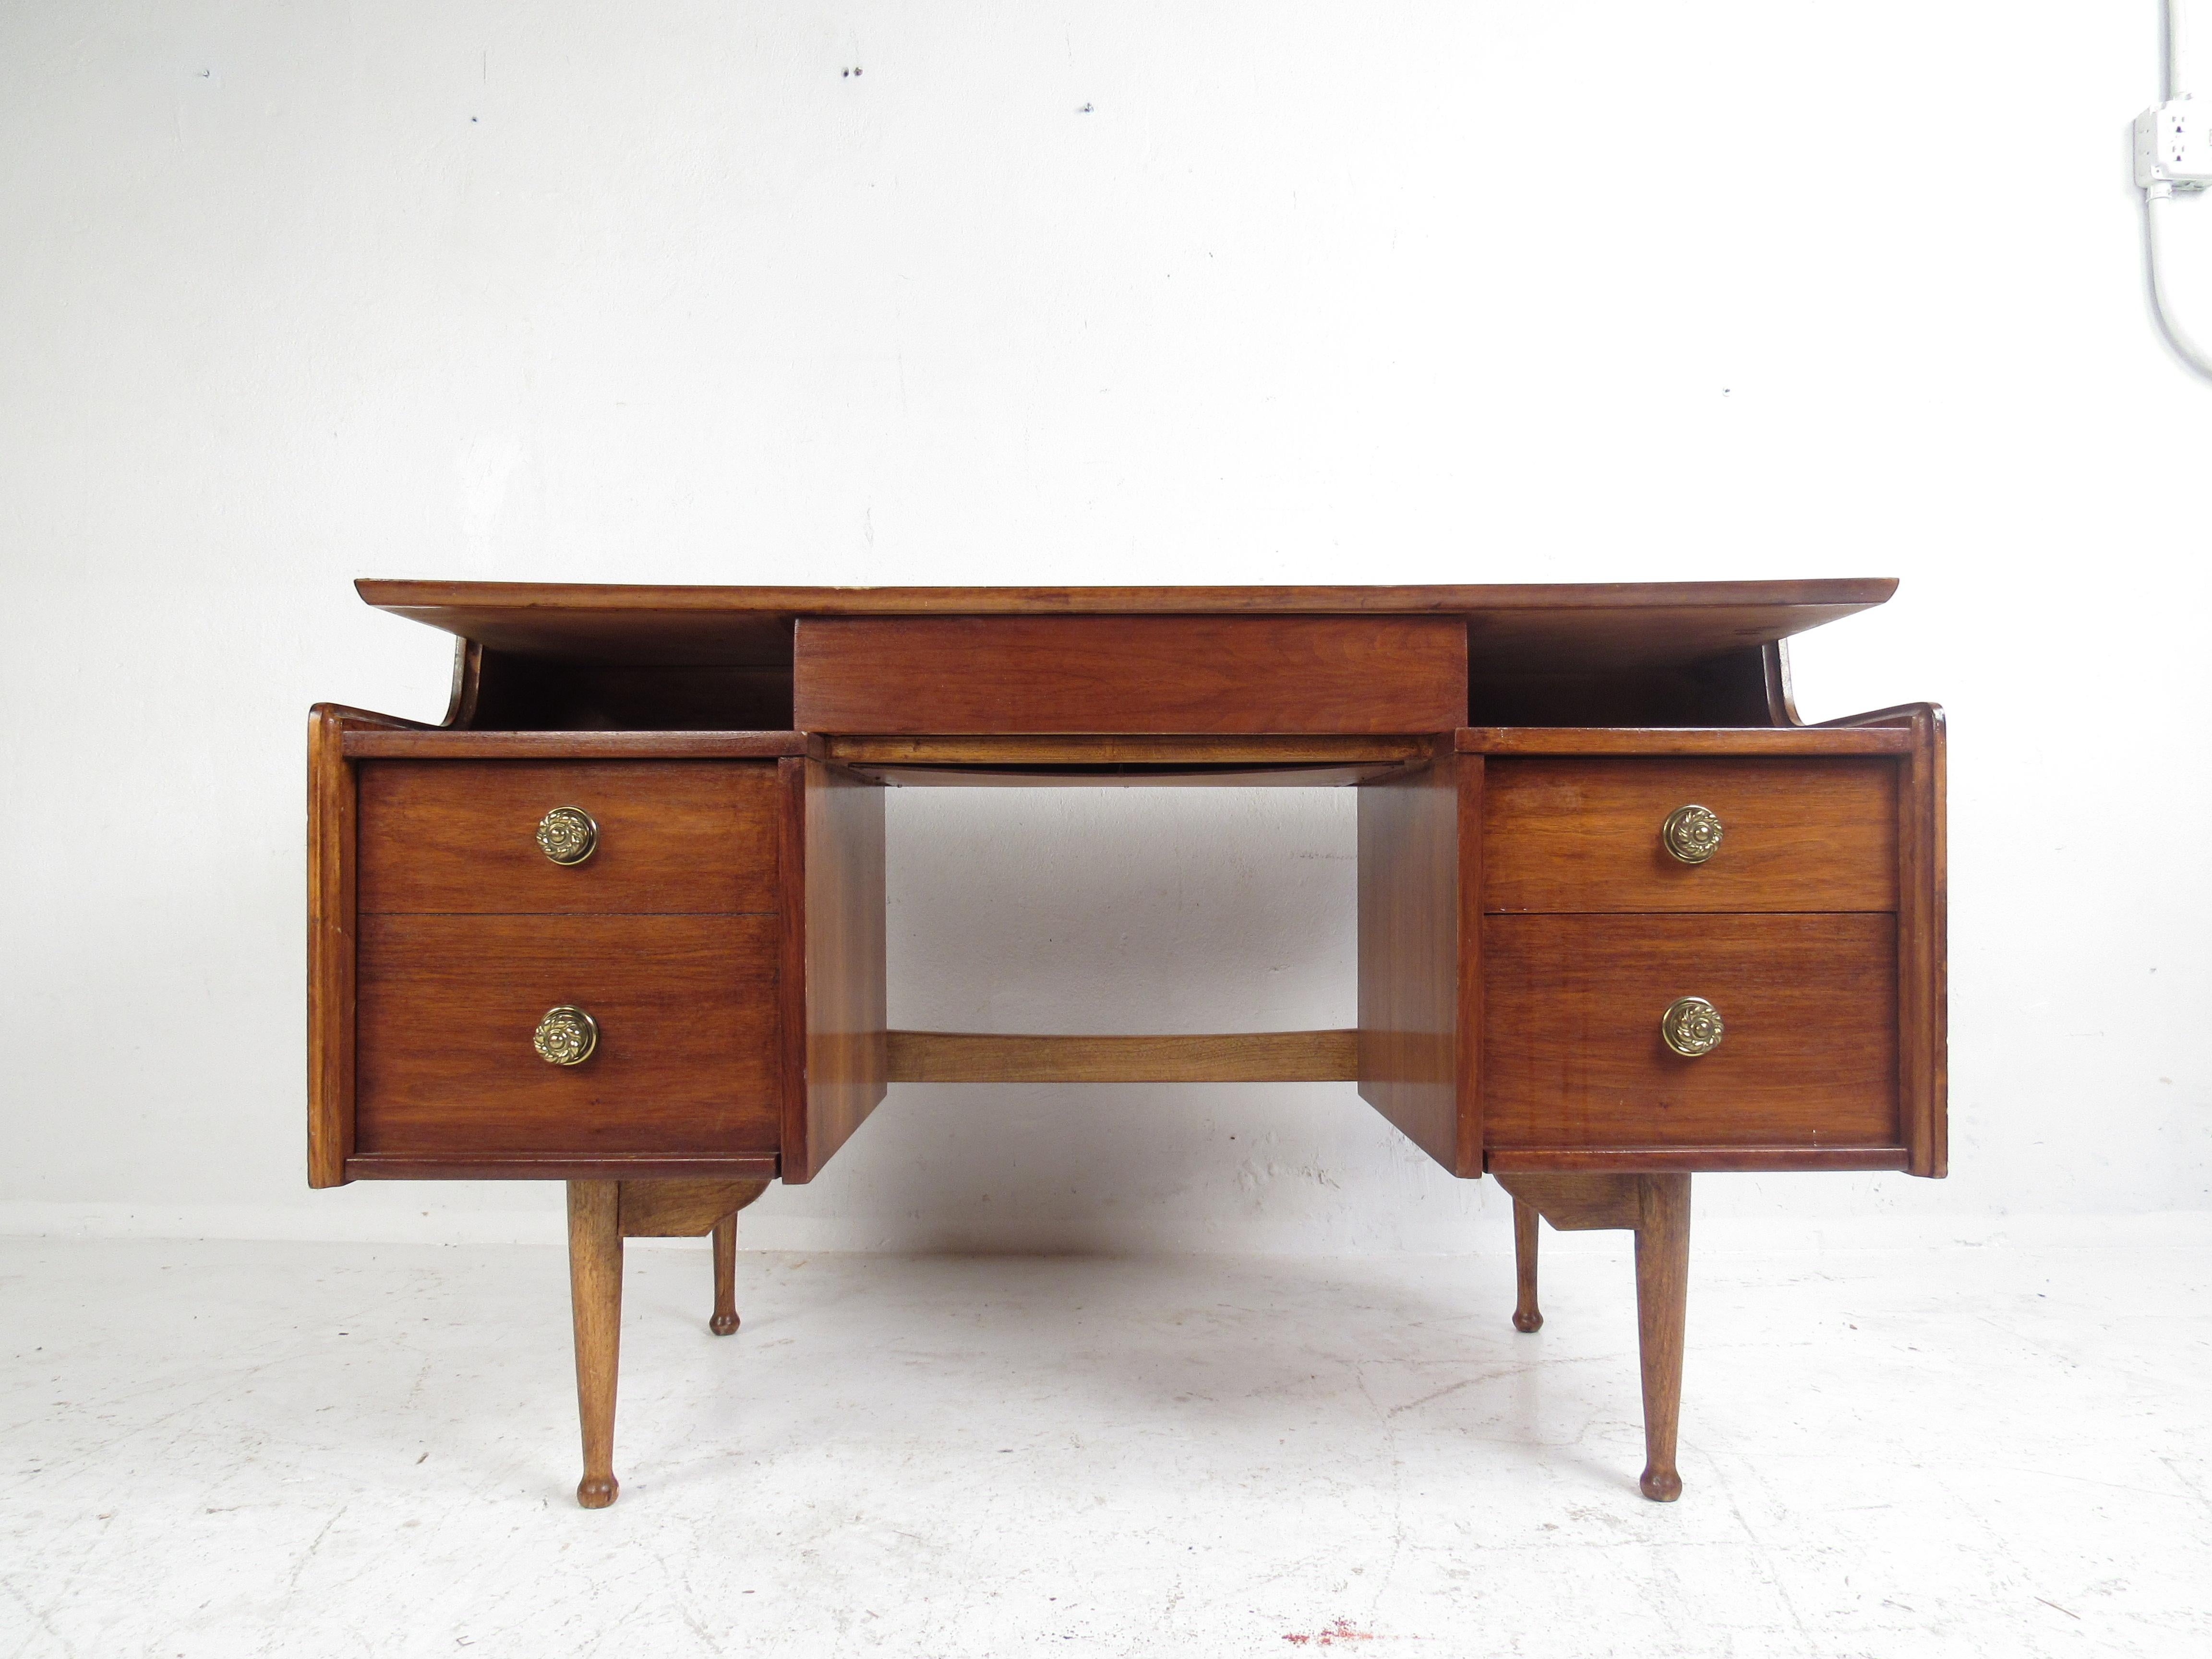 This gorgeous vintage modern desk boasts a floating top offering plenty of workspace. A well constructed piece with a finished back, drumstick legs, and a hidden center drawer. The sleek design has five hefty drawers ensuring ample room for storage.